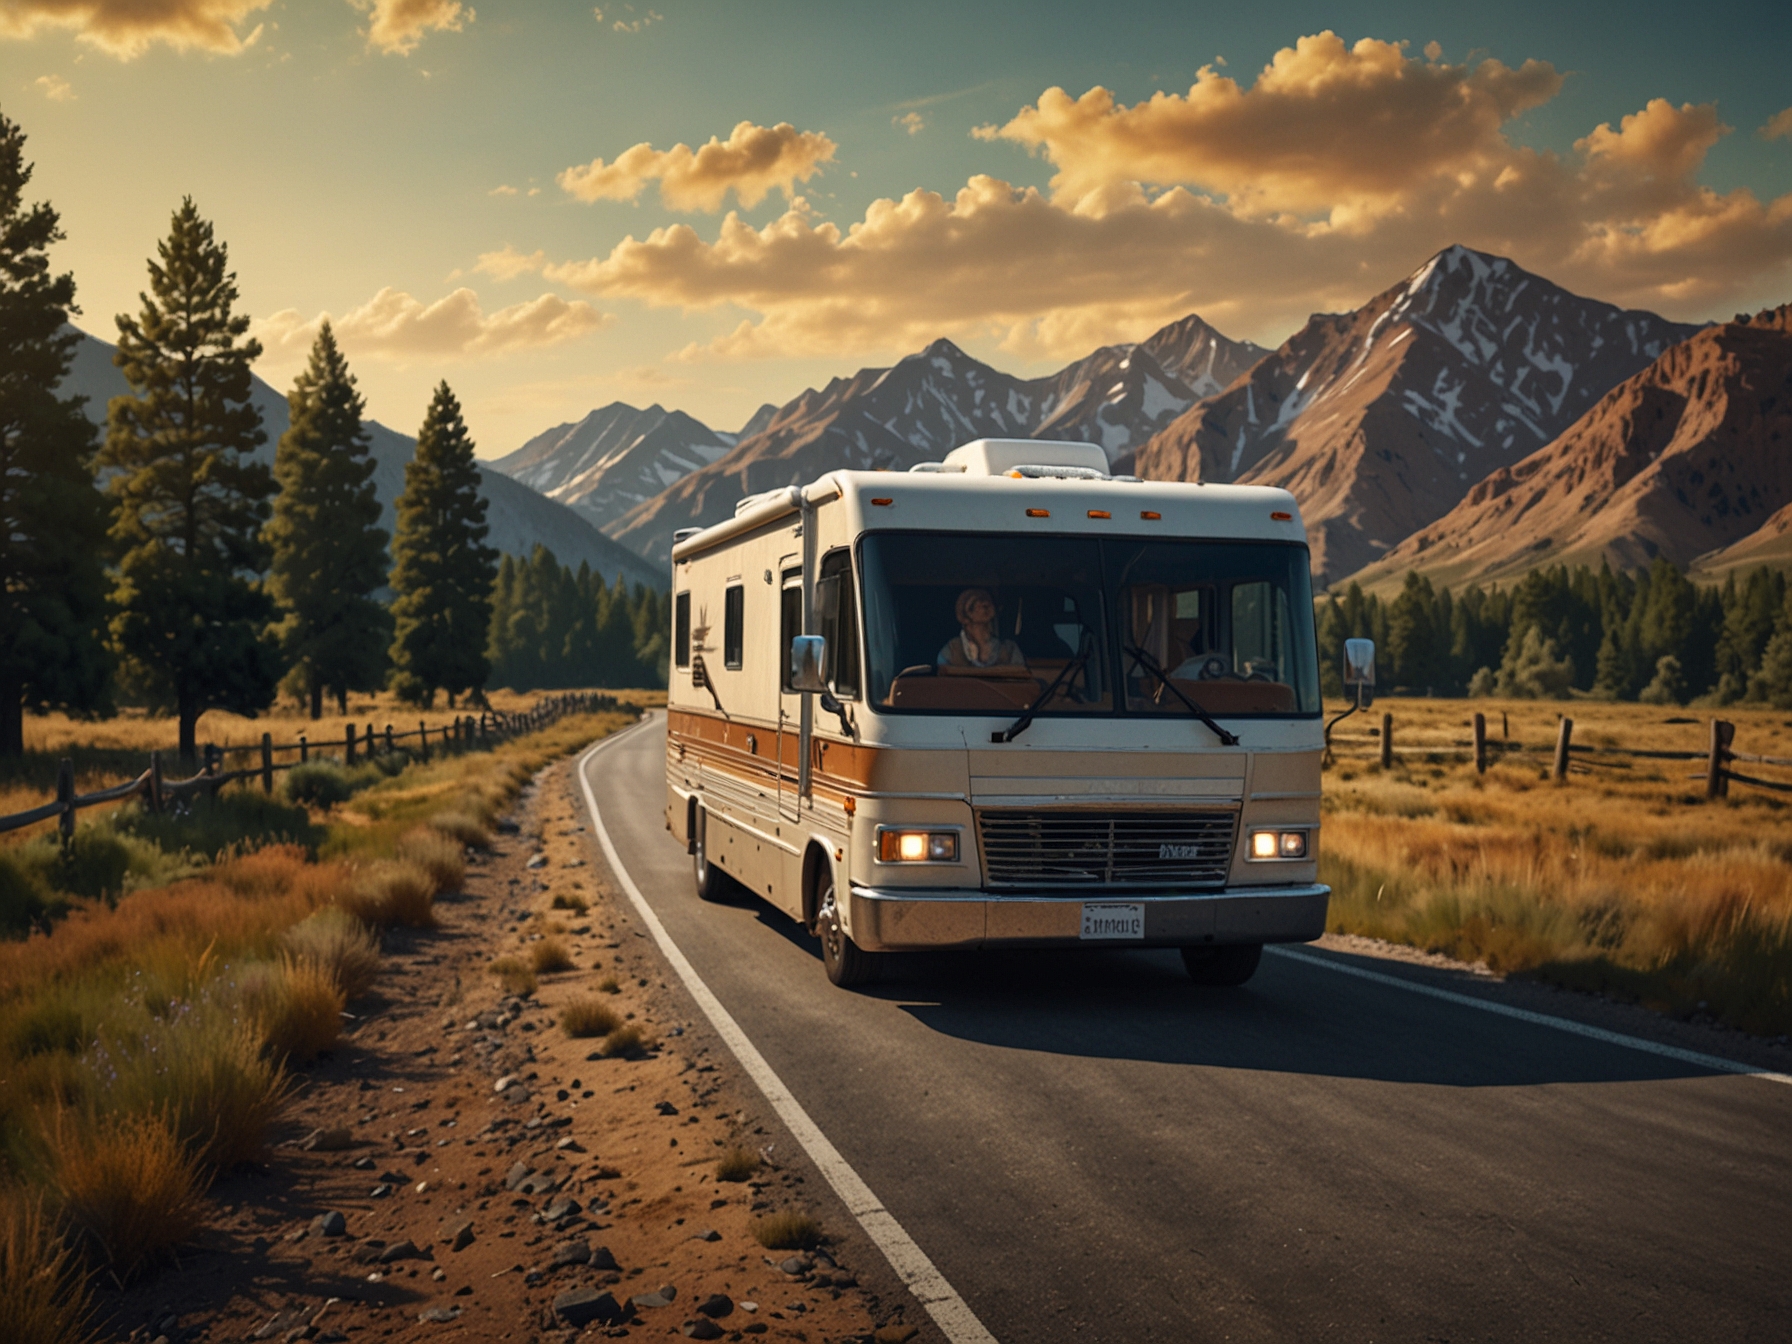 Travelers setting off on a summer road trip in their RV, showcasing the flexibility and convenience of this travel mode. The backdrop includes open roads and a clear sky, emphasizing the freedom of road trips.